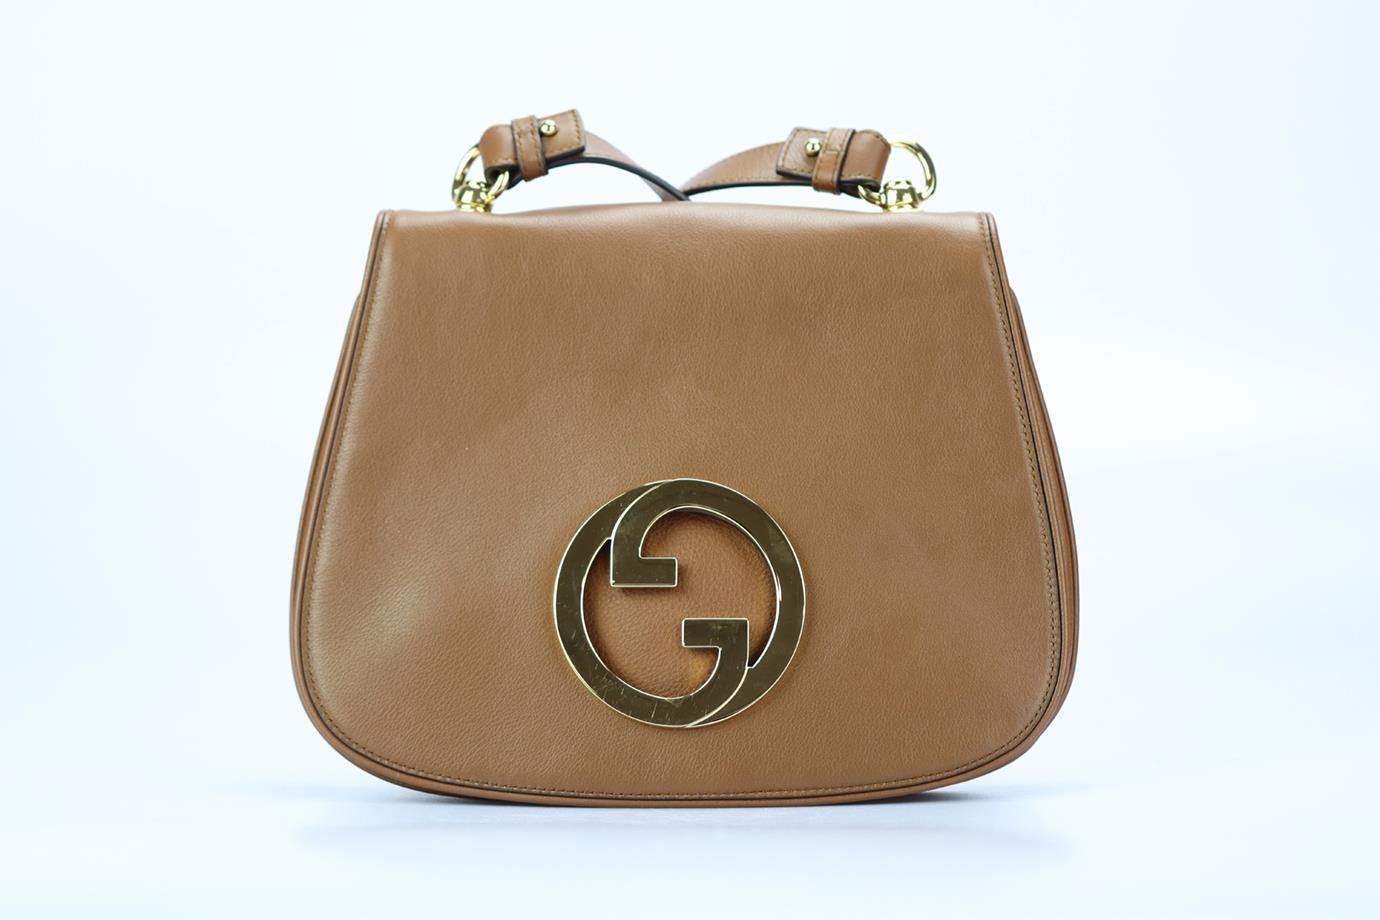 Gucci New Blondie Gg Leather Shoulder Bag. Brown. Magnetic fastening - Front. Comes with - additional shoulder strap. Does not come with - dustbag or box. Height: 8.9 in. Width: 11.2 in. Depth: 1.2 in. Strap drop: 22.8 in. Condition: Used. Very good